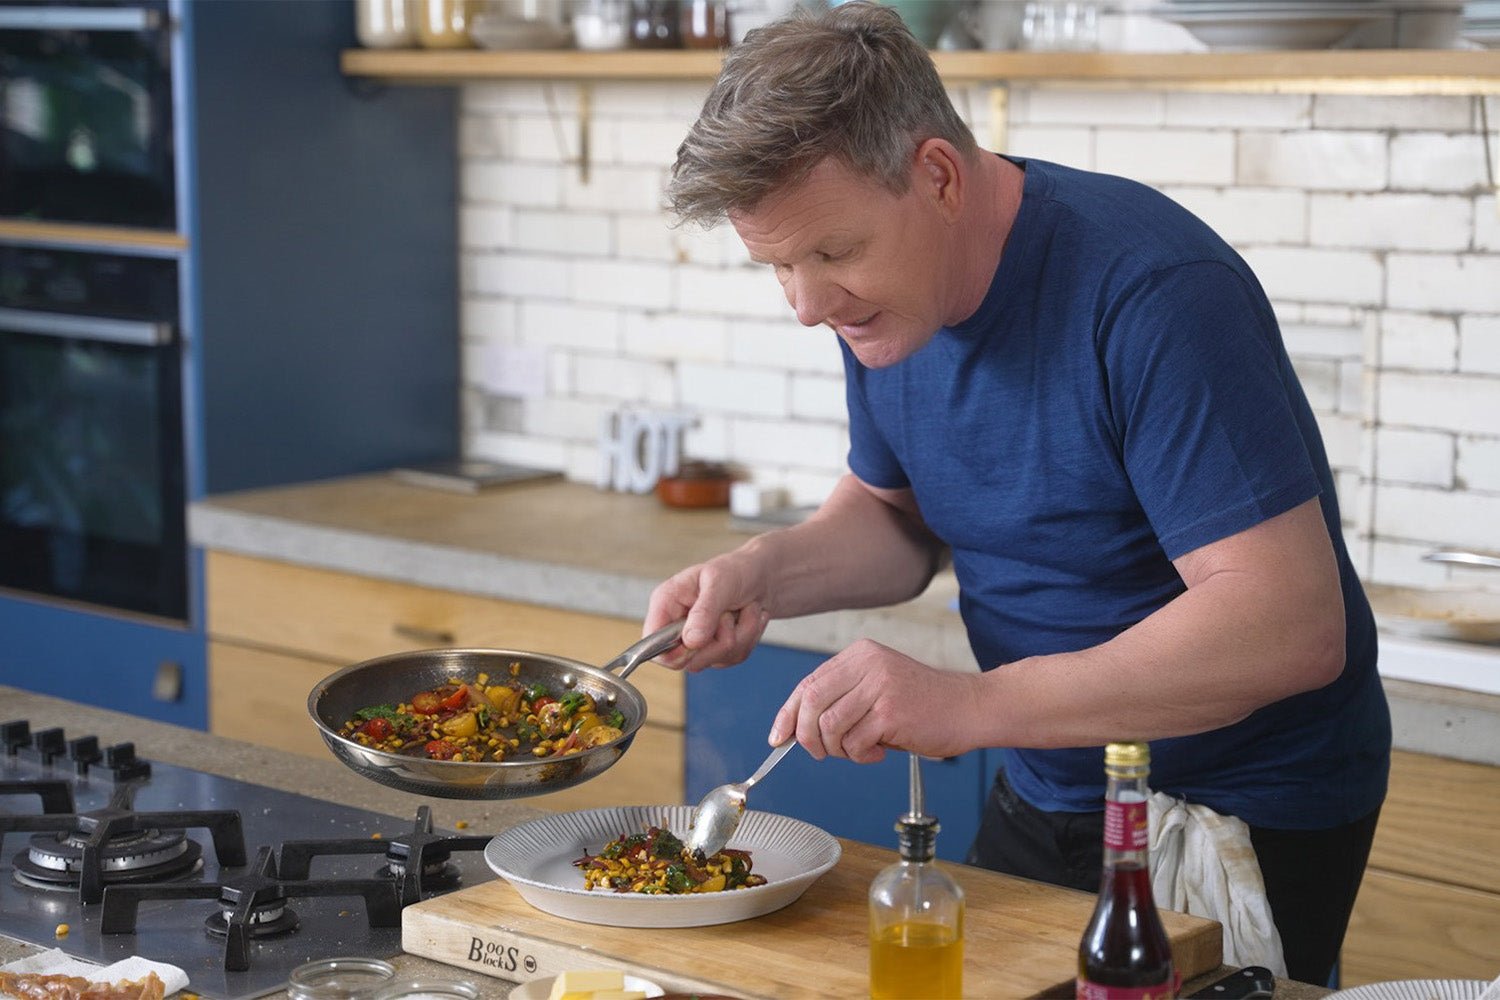 This is the nonstick cookware Gordon Ramsay uses (it's seriously